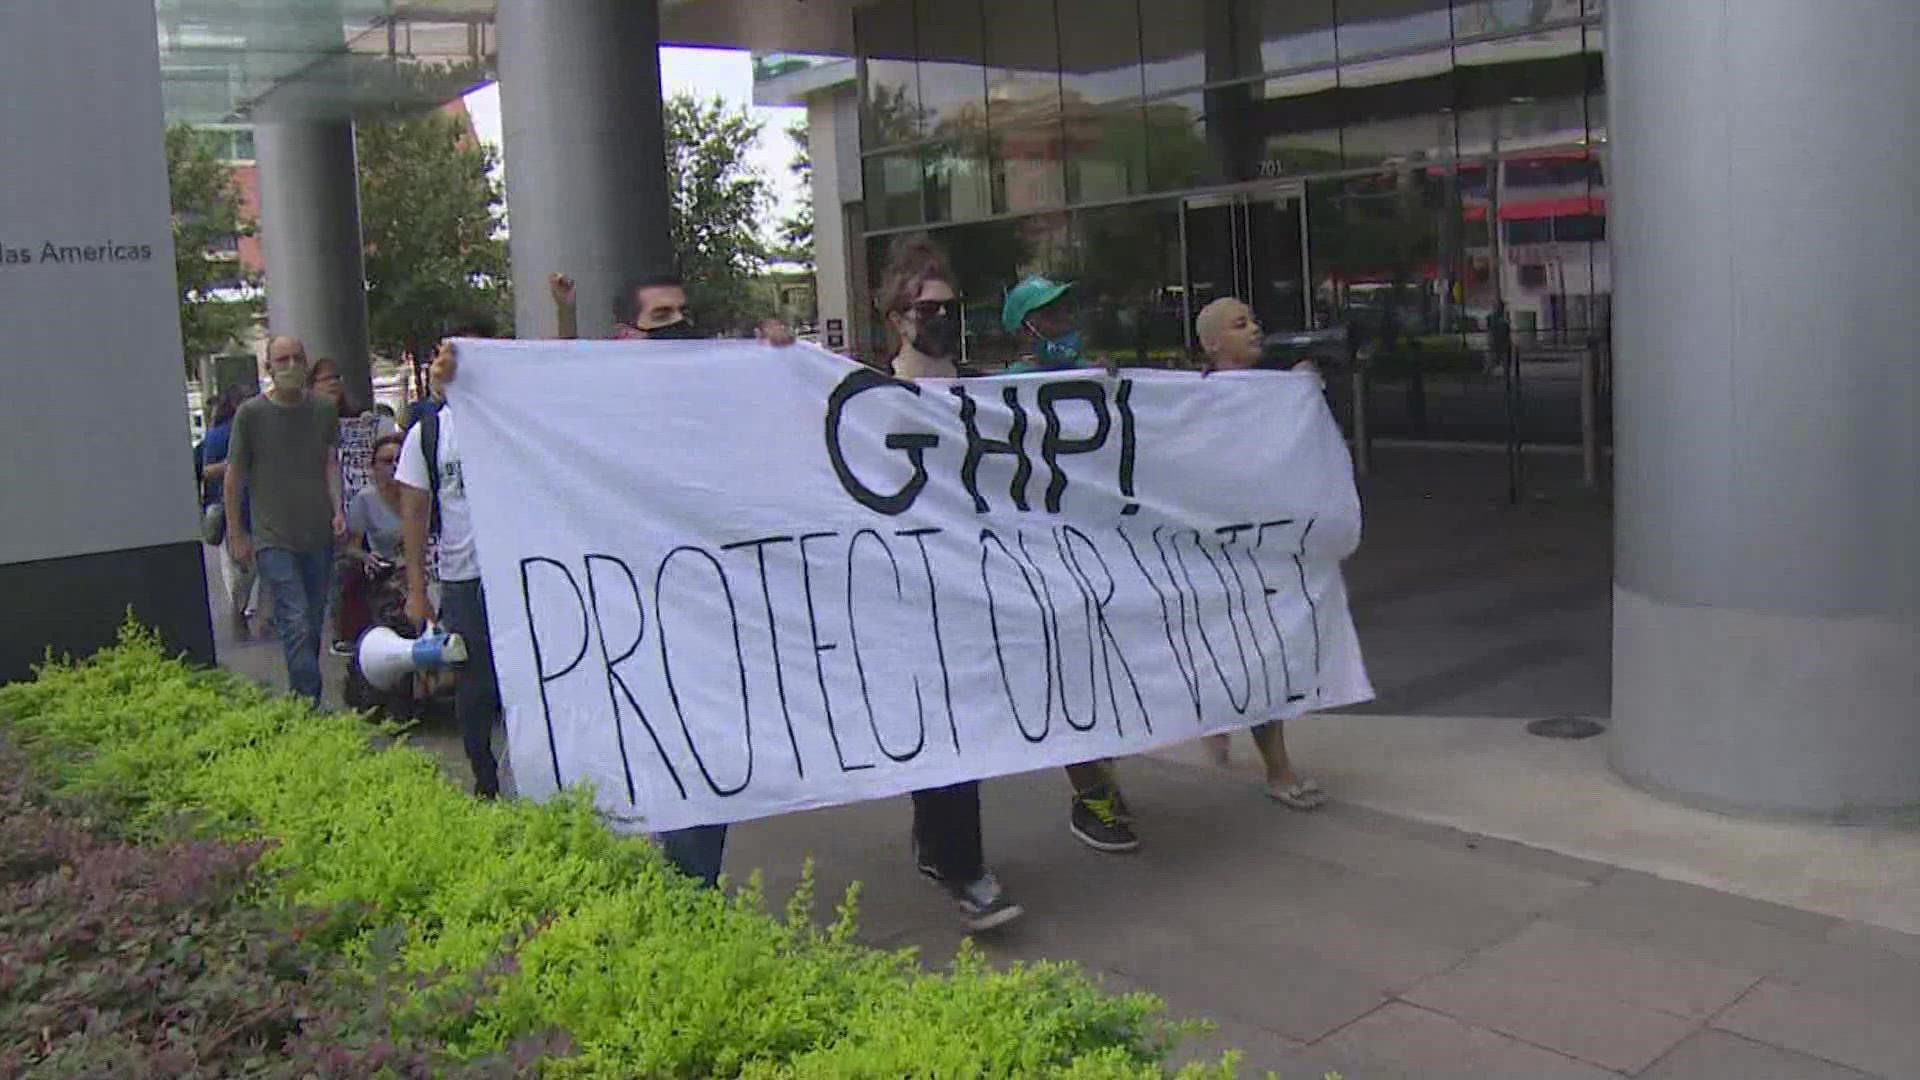 Local voting rights activists rallied outside the Greater Houston Partnership on Tuesday.